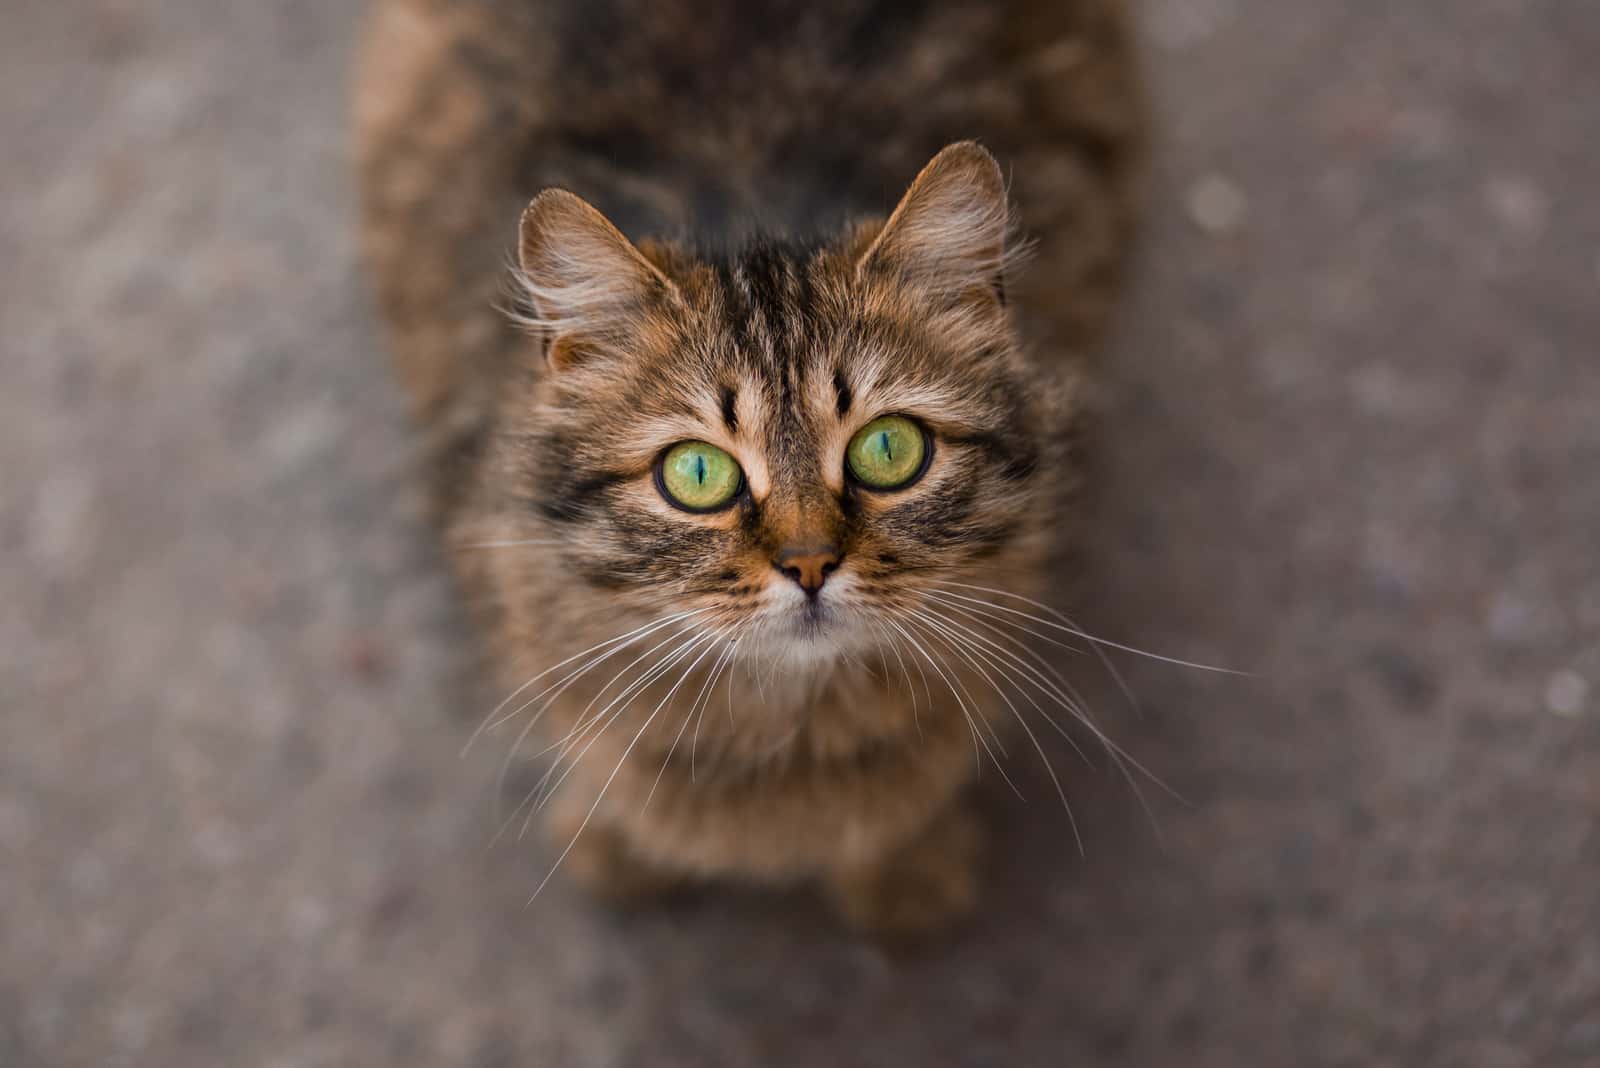 Cat with green eyes sitting outdoor